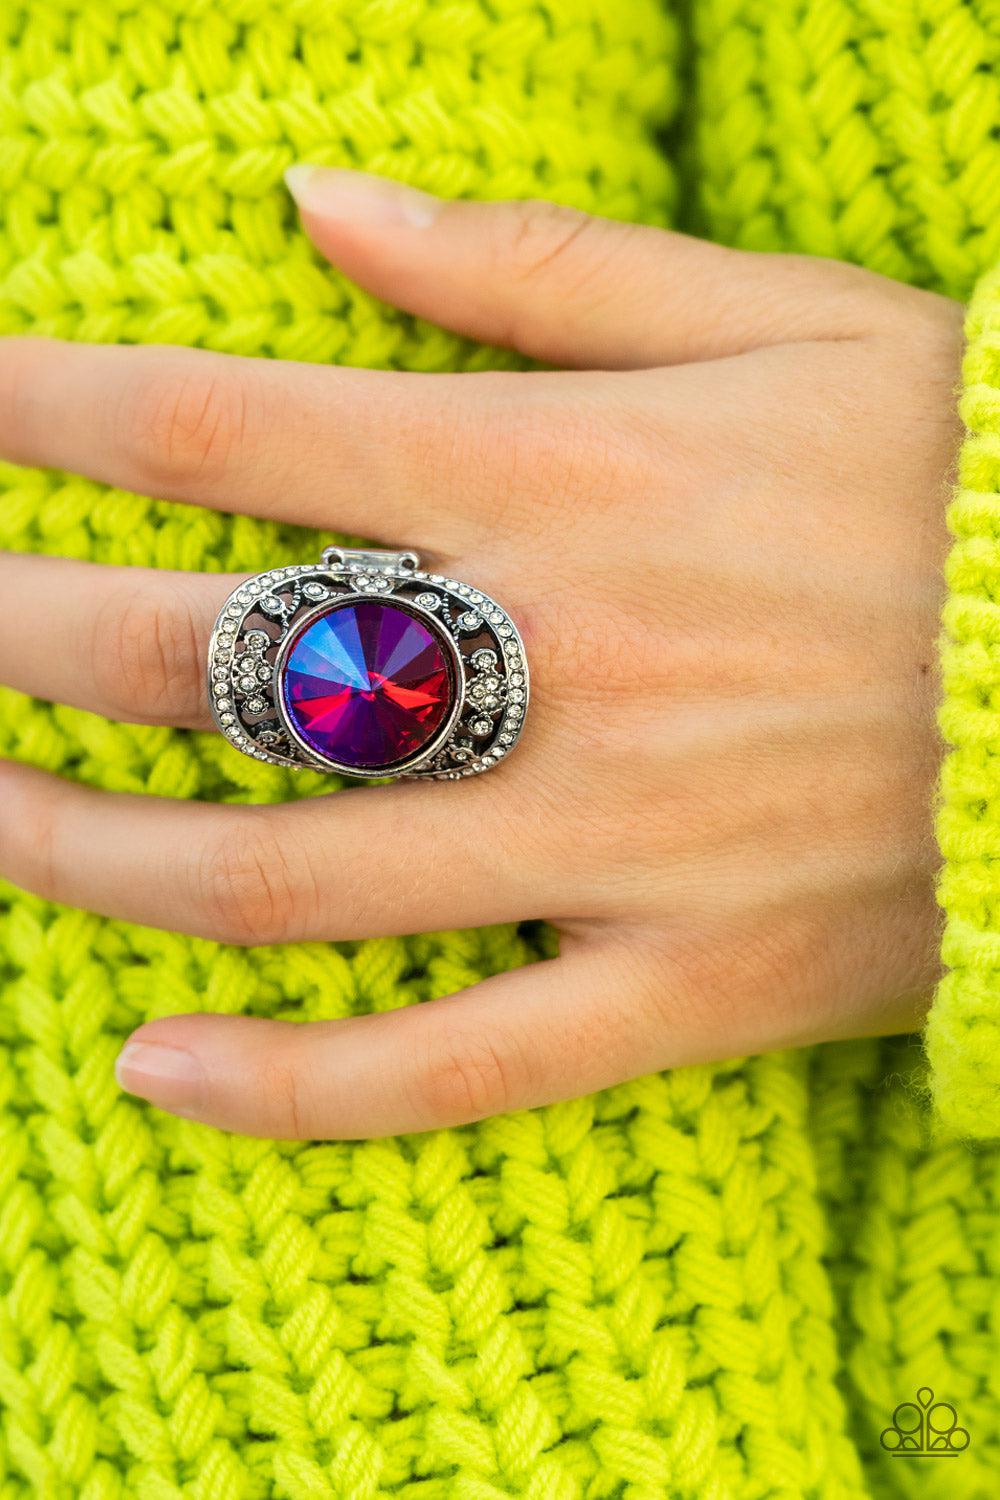 Galactic Garden Pink Opalescent Gem Ring - Paparazzi Accessories-on model - CarasShop.com - $5 Jewelry by Cara Jewels